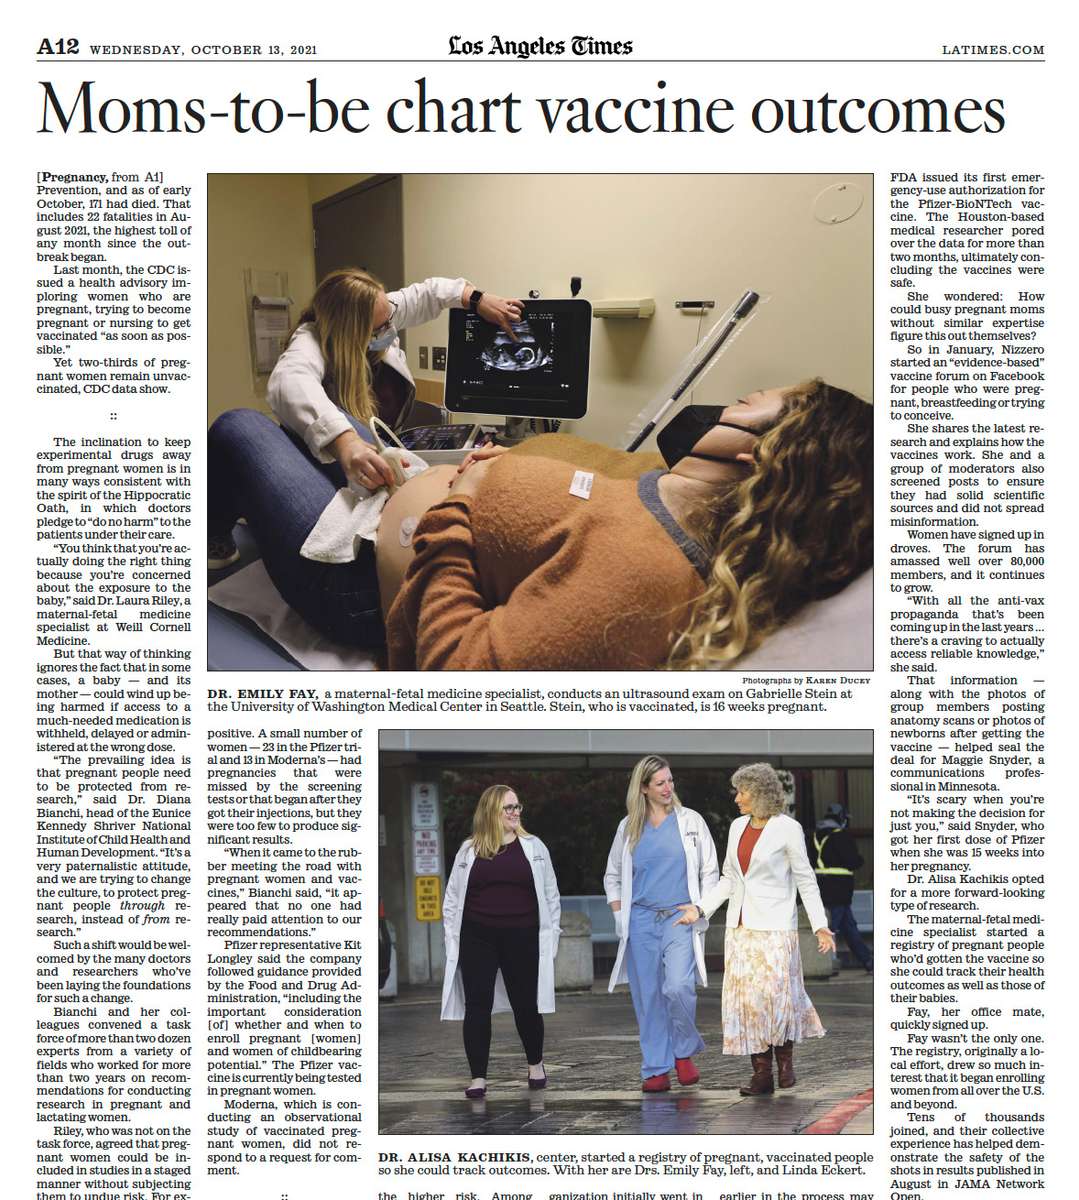 {quote}Pregnant women were kept out of clinical trials. That left them vulnerable to COVID-19{quote}, photos for the Los Angeles Times, published October 13, 2021.